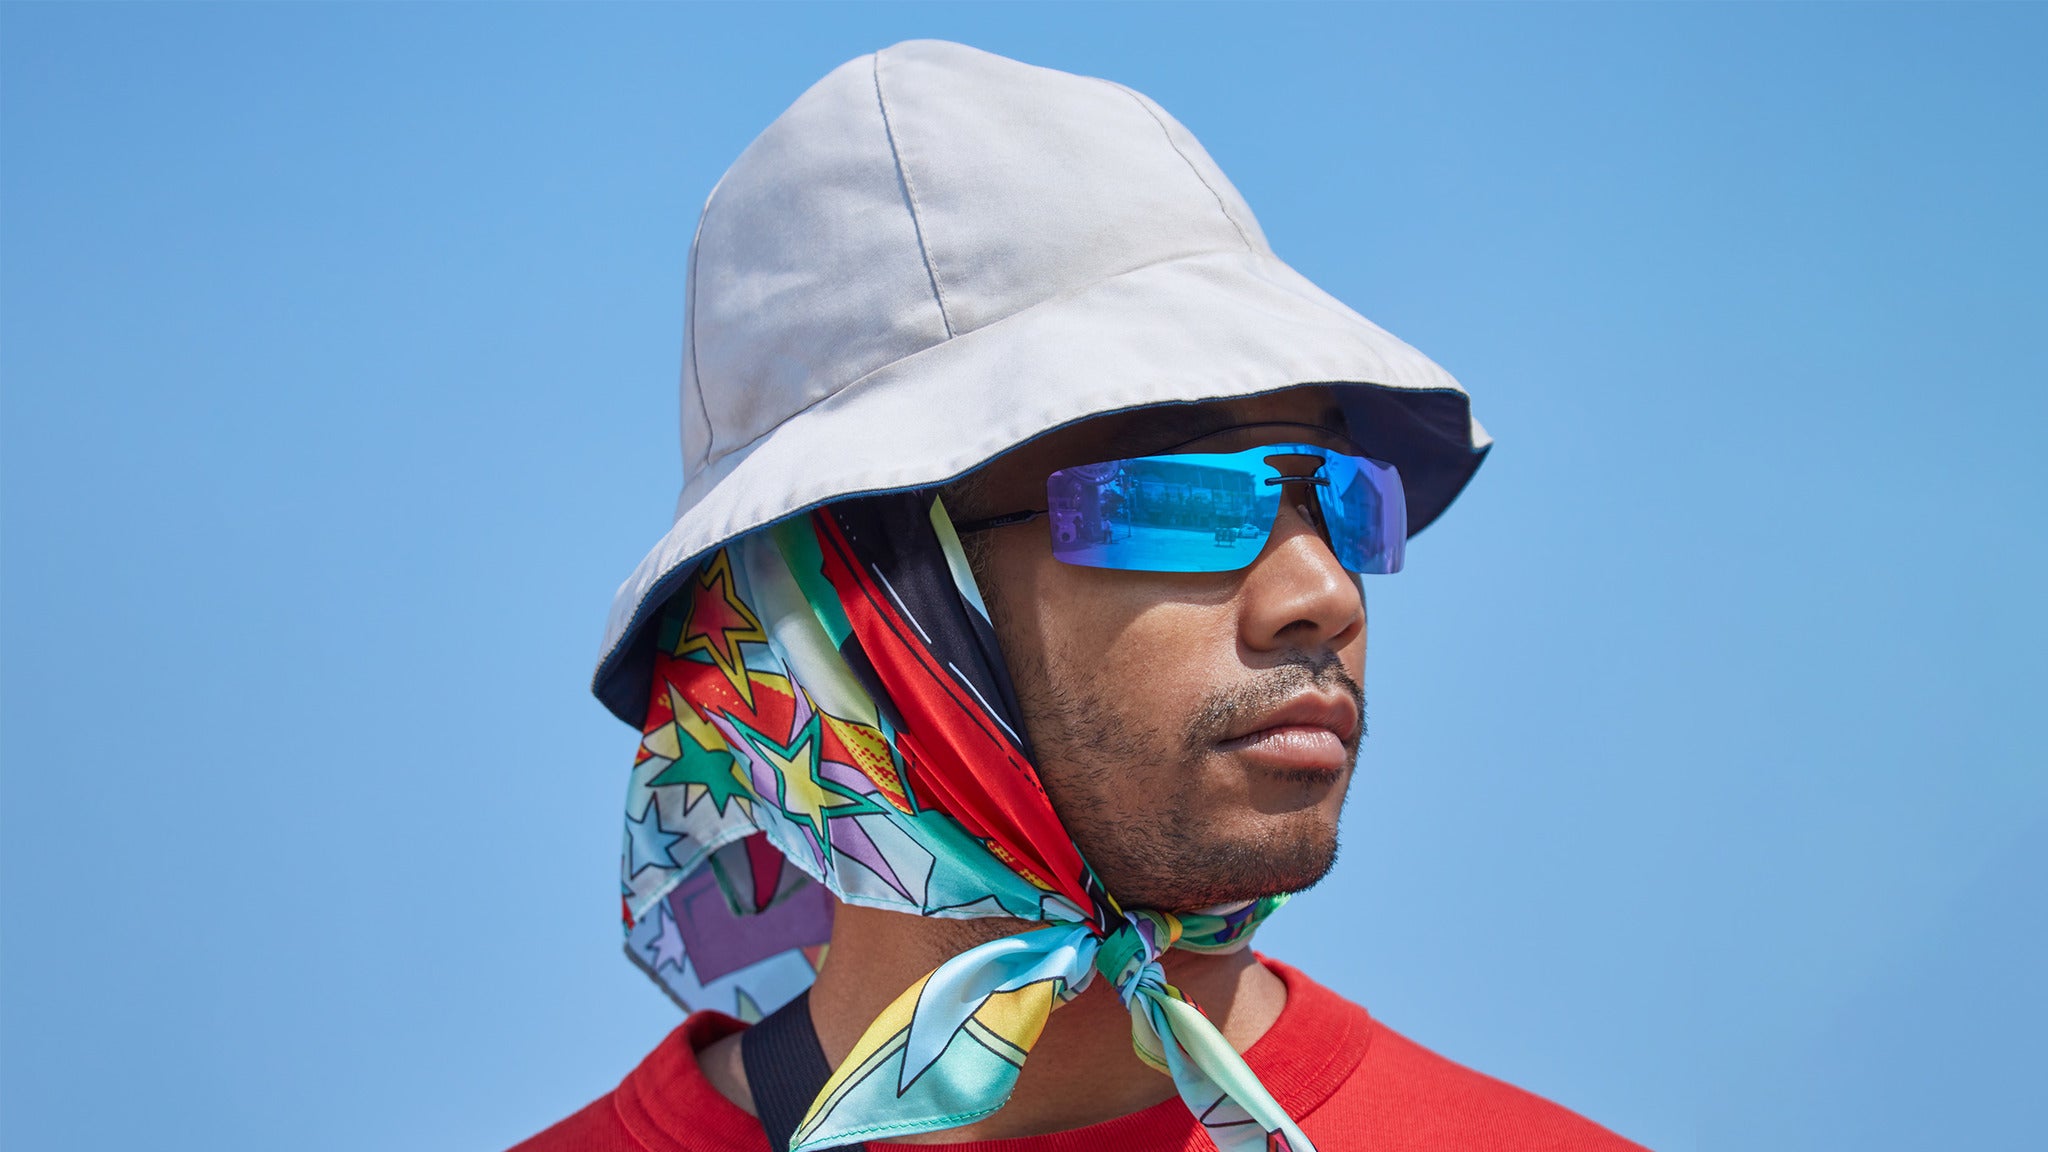 Toro y Moi in Hollywood promo photo for Official Platinum presale offer code